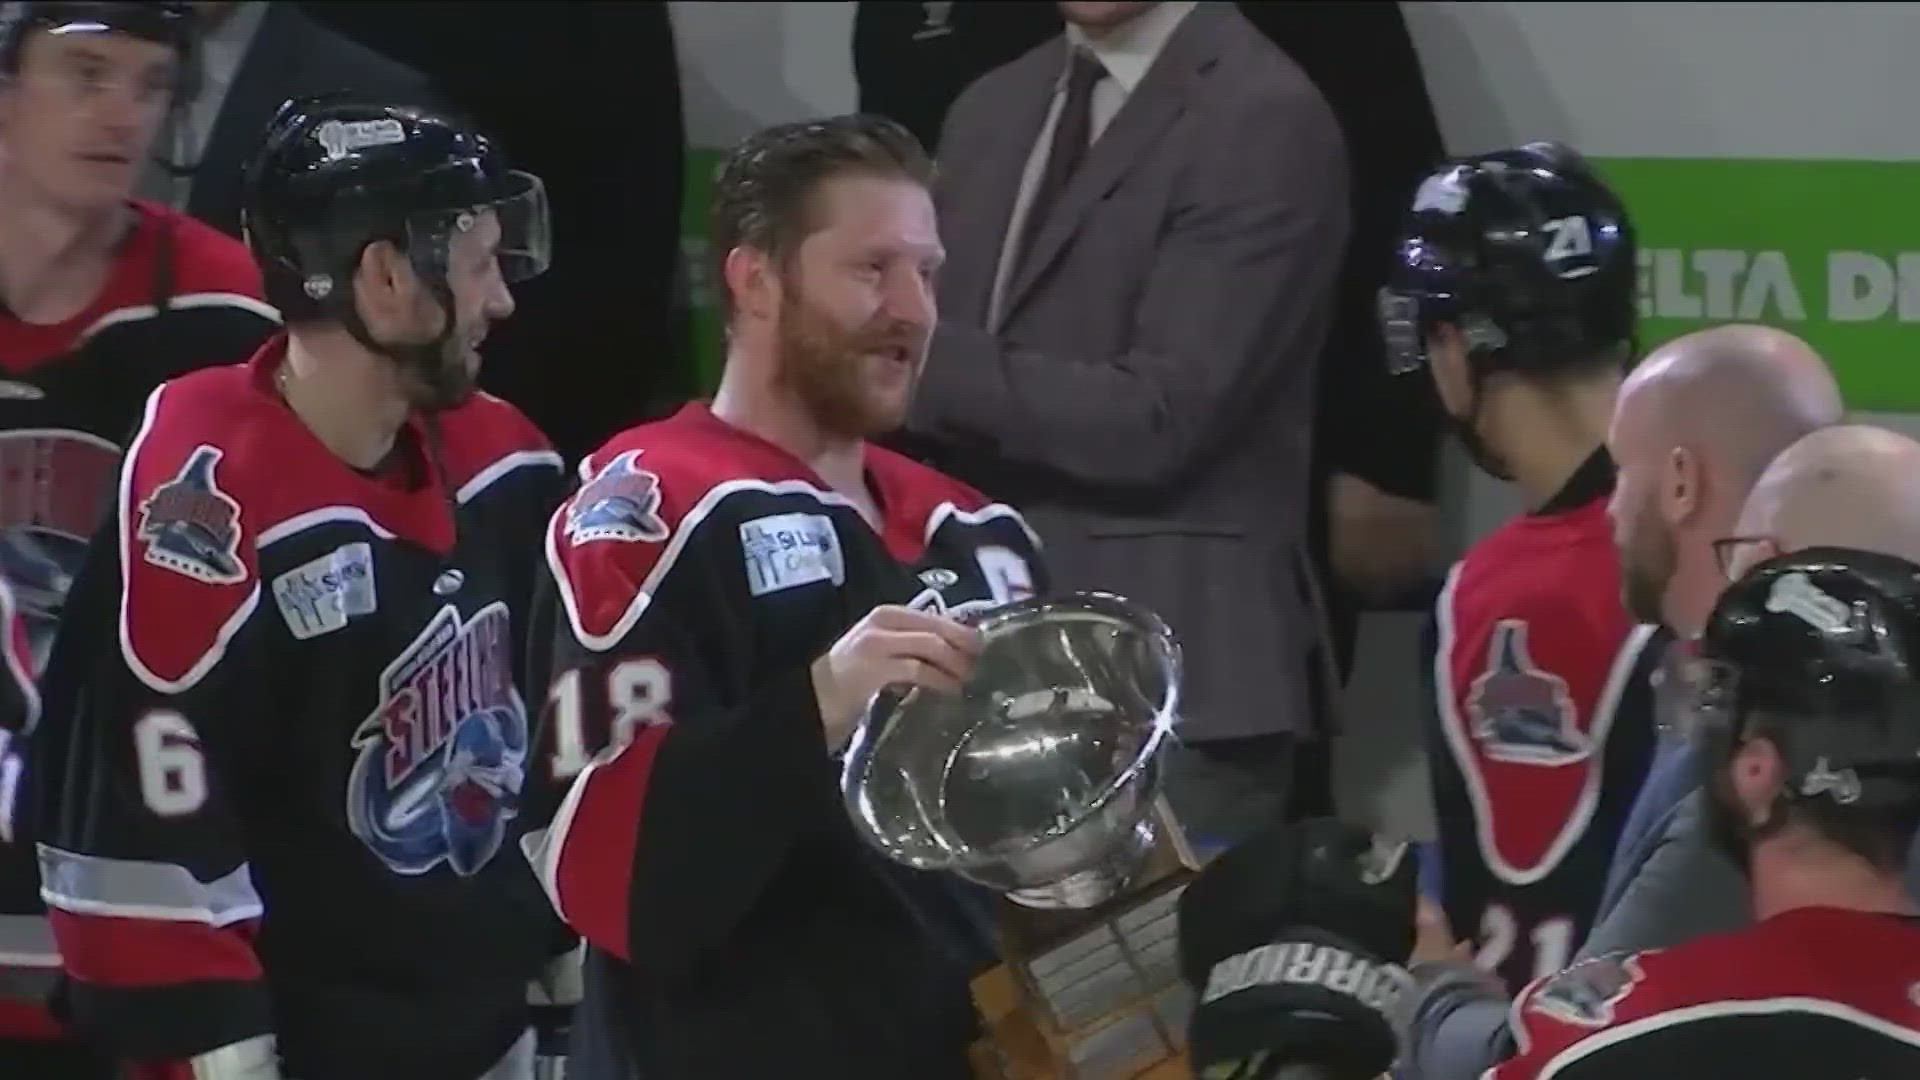 The red-hot Steelheads captured the Brabham Cup for the first time since the 2009-2010 season on Saturday night, defeating the Kansas City Mavericks 1-0.